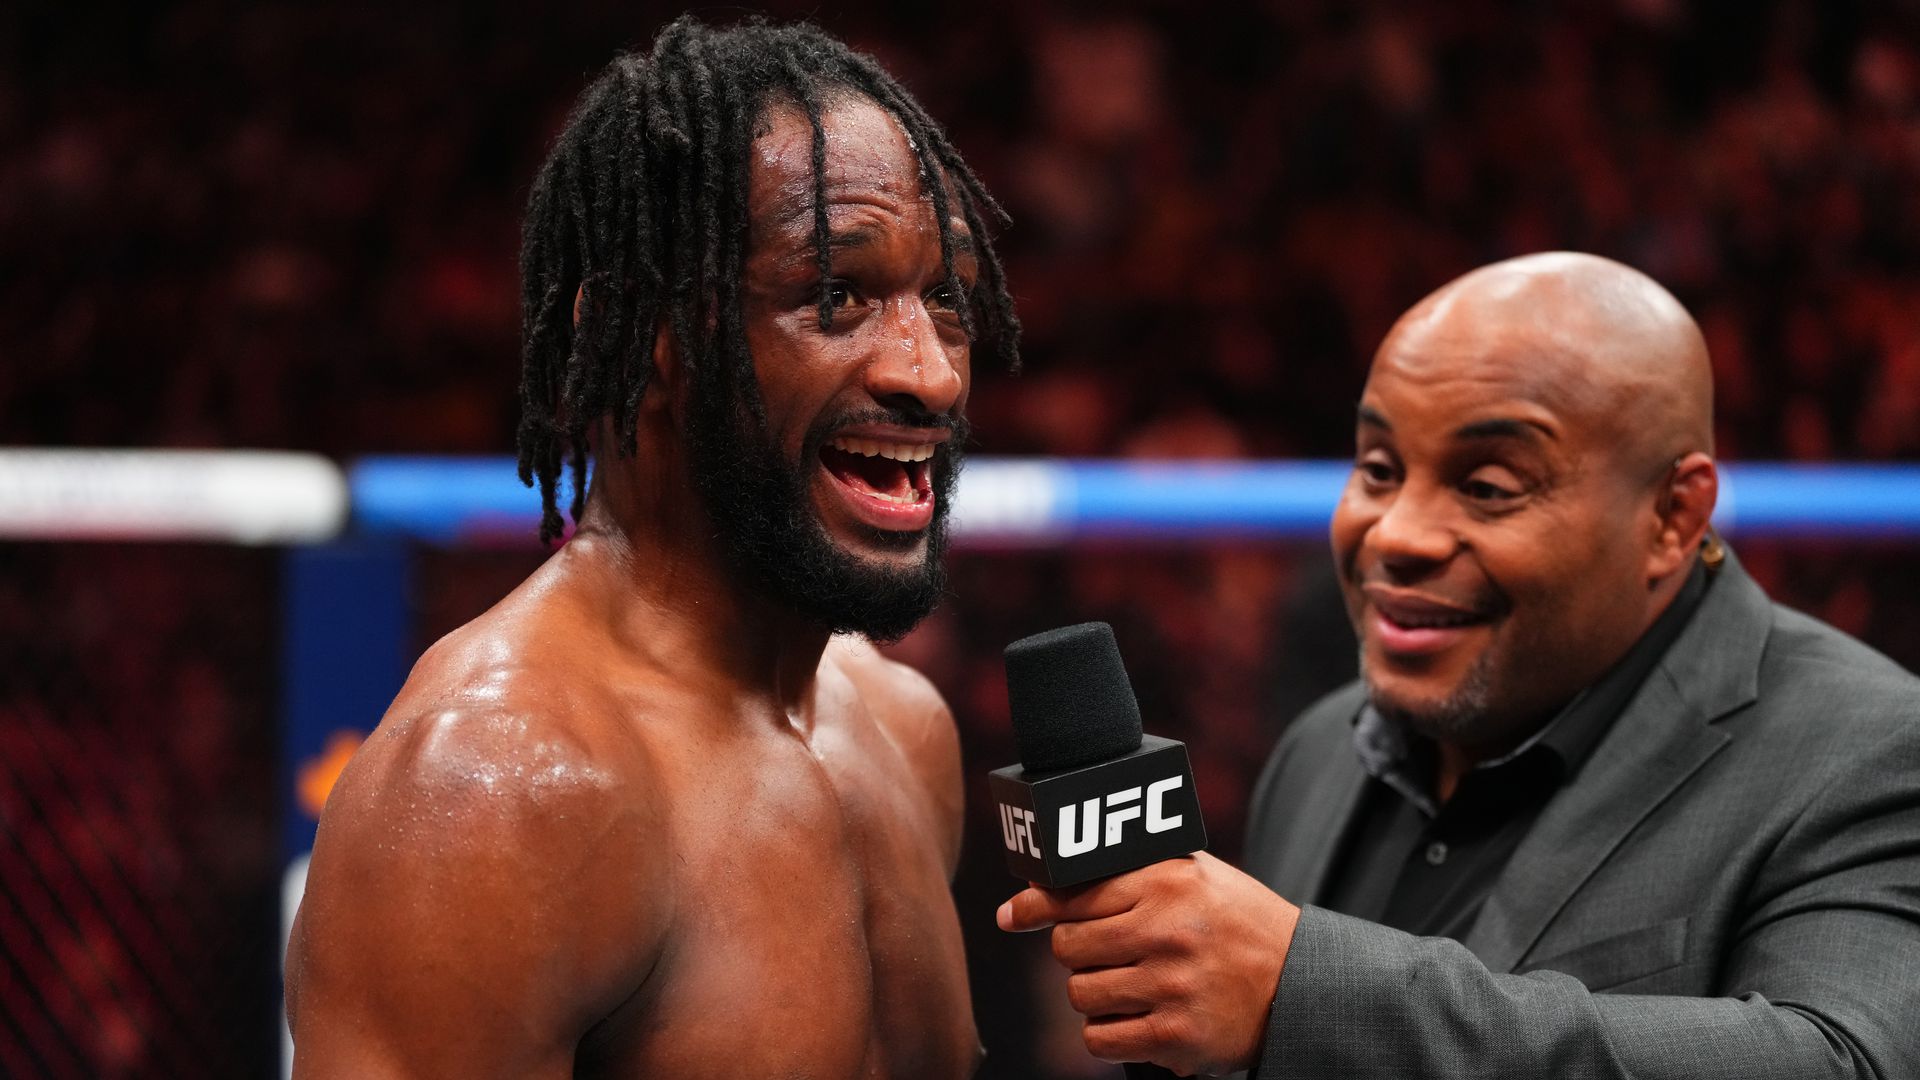 neil magny knew ufc wanted mike malott to win: ‘it was very evident what the game plan was’